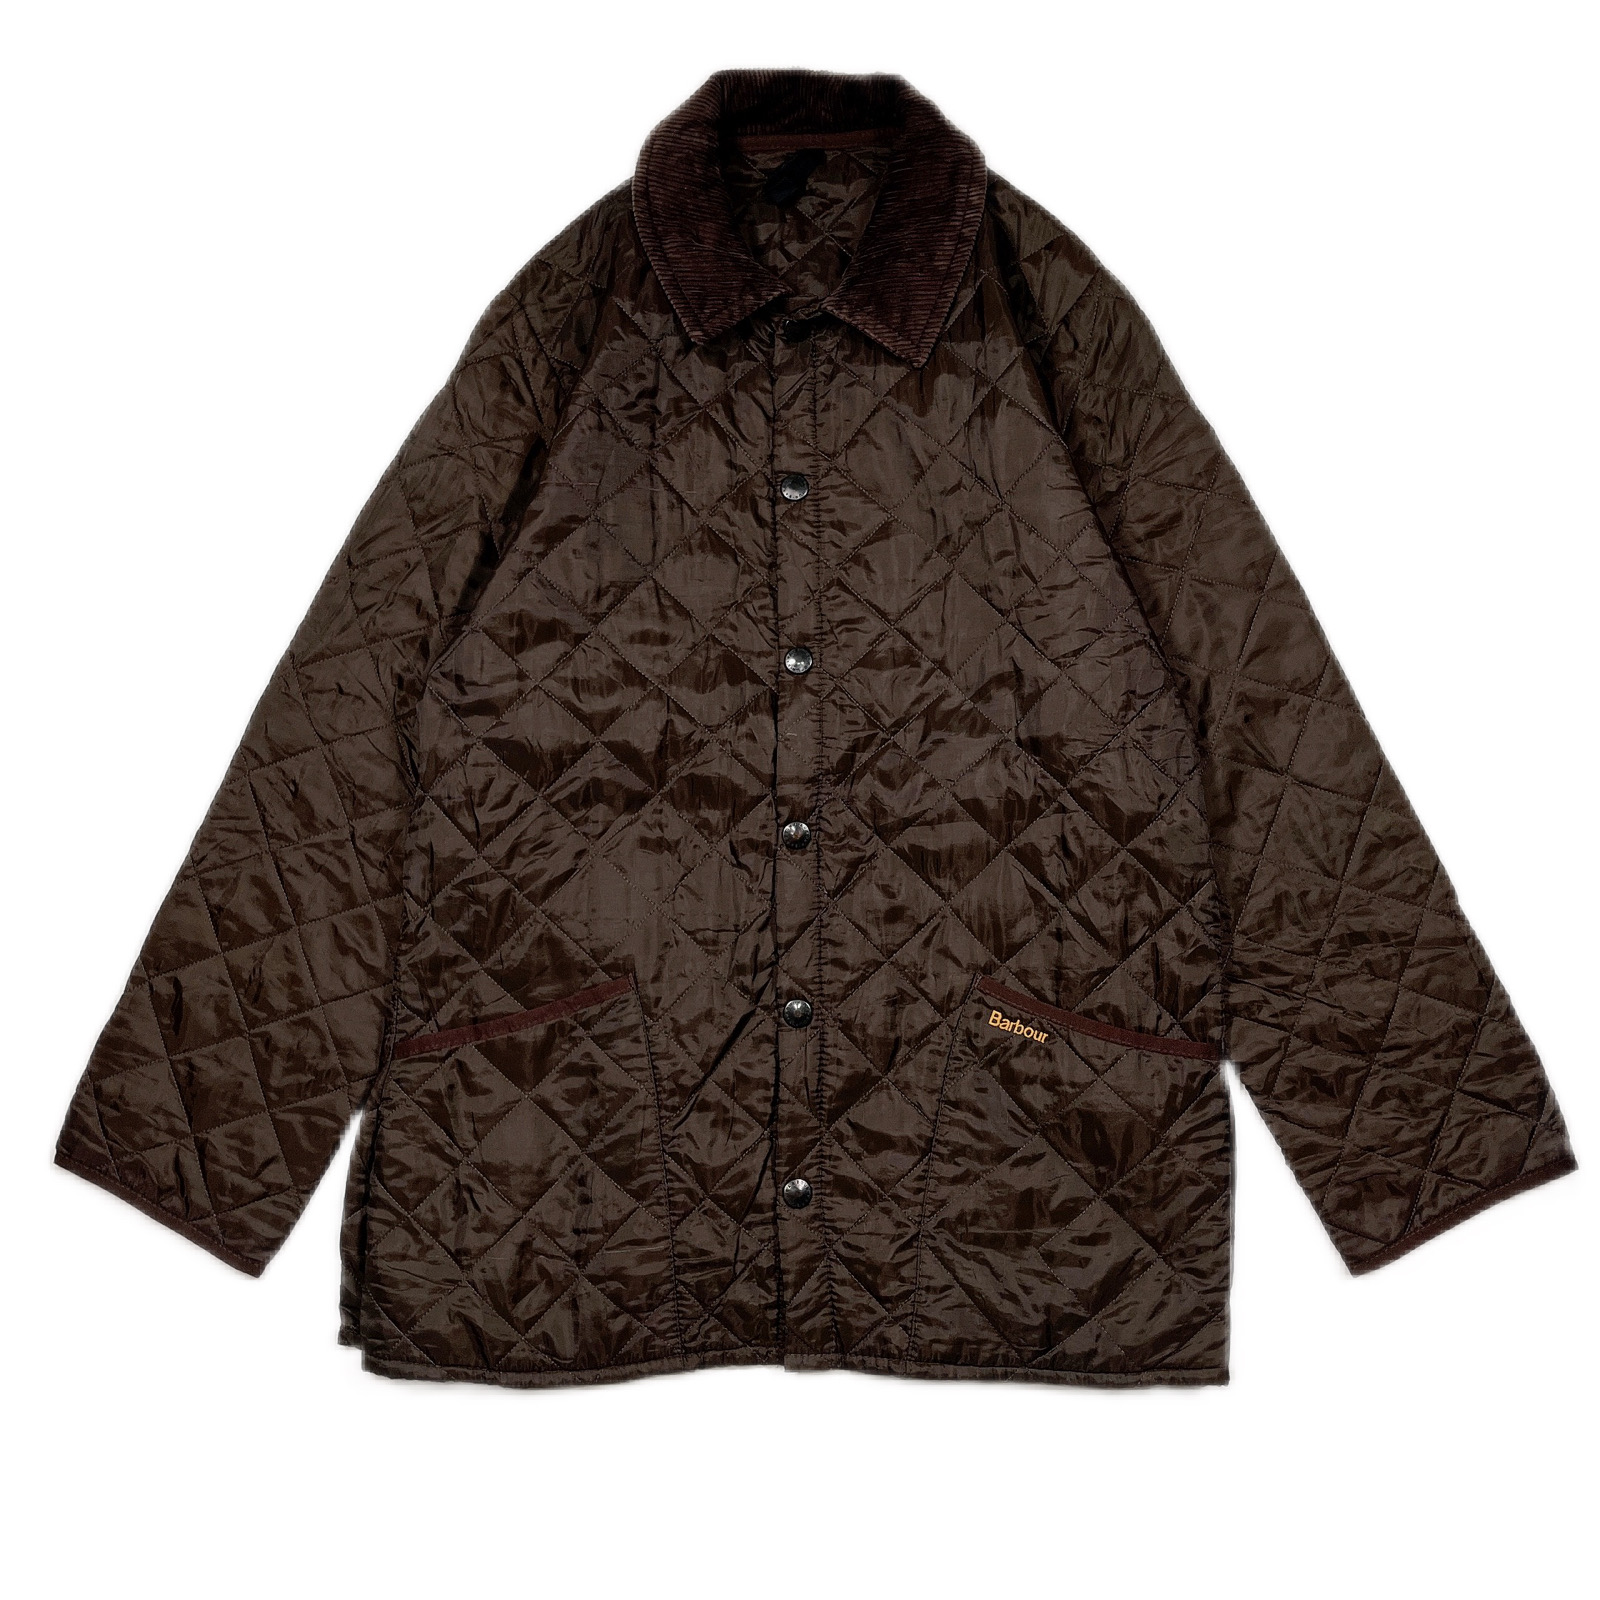 Barbour 「LIDDESDALE」quilting jacket バブアー キルティング